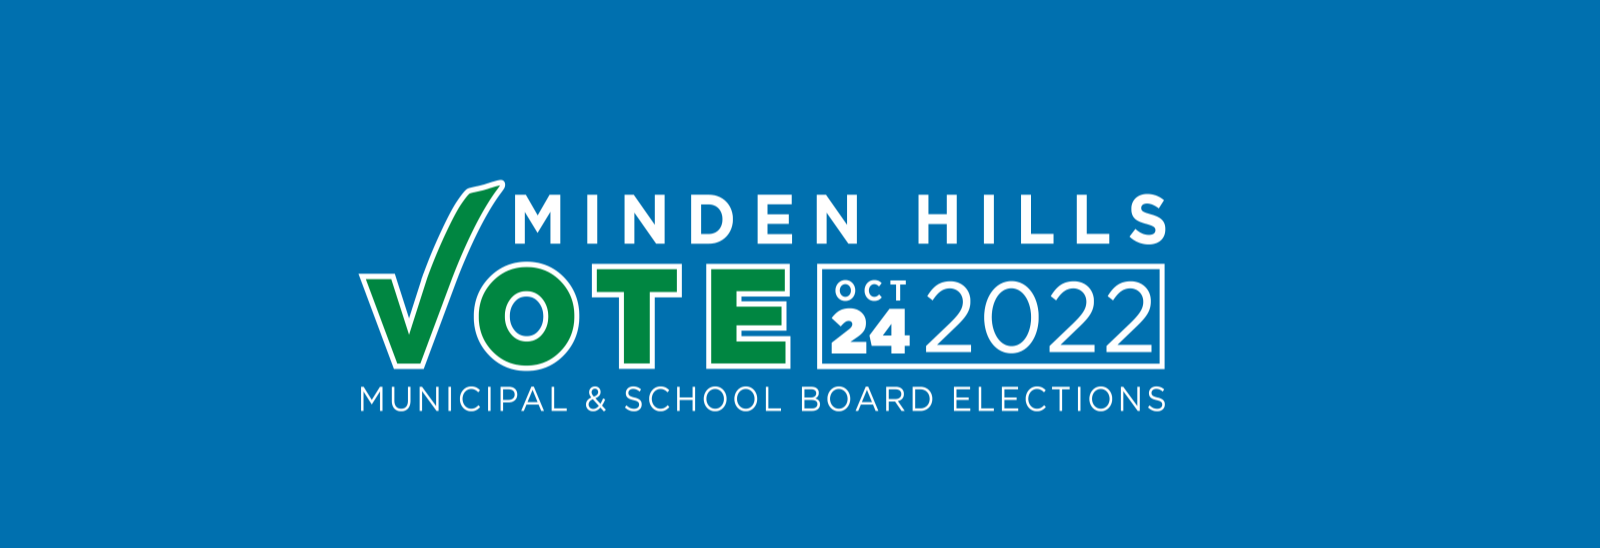 Minden Hills Municipal and School Board Elections 2022